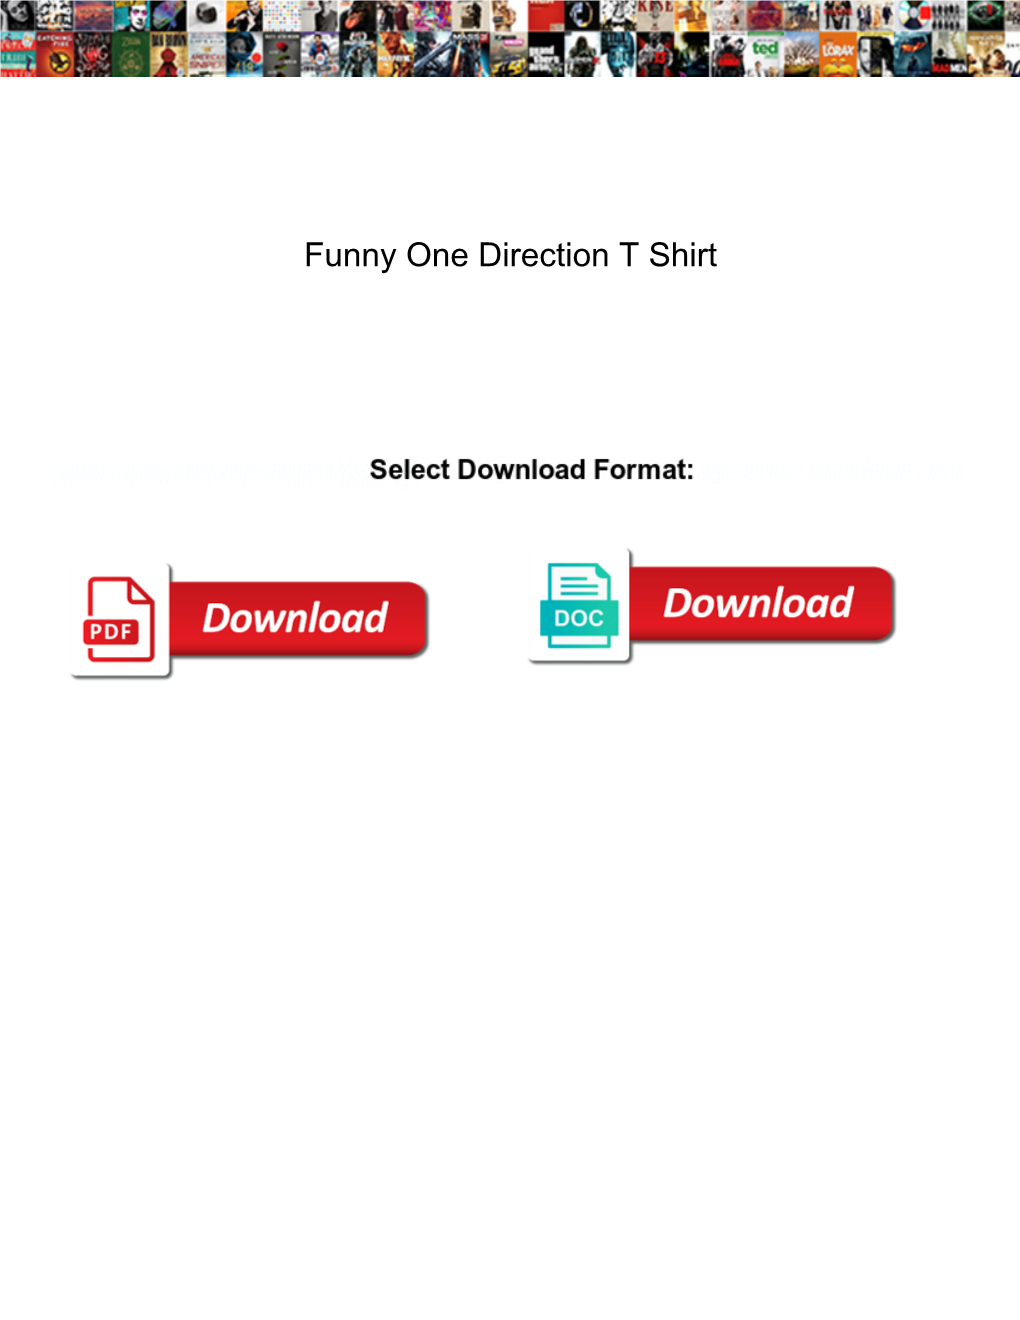 Funny One Direction T Shirt